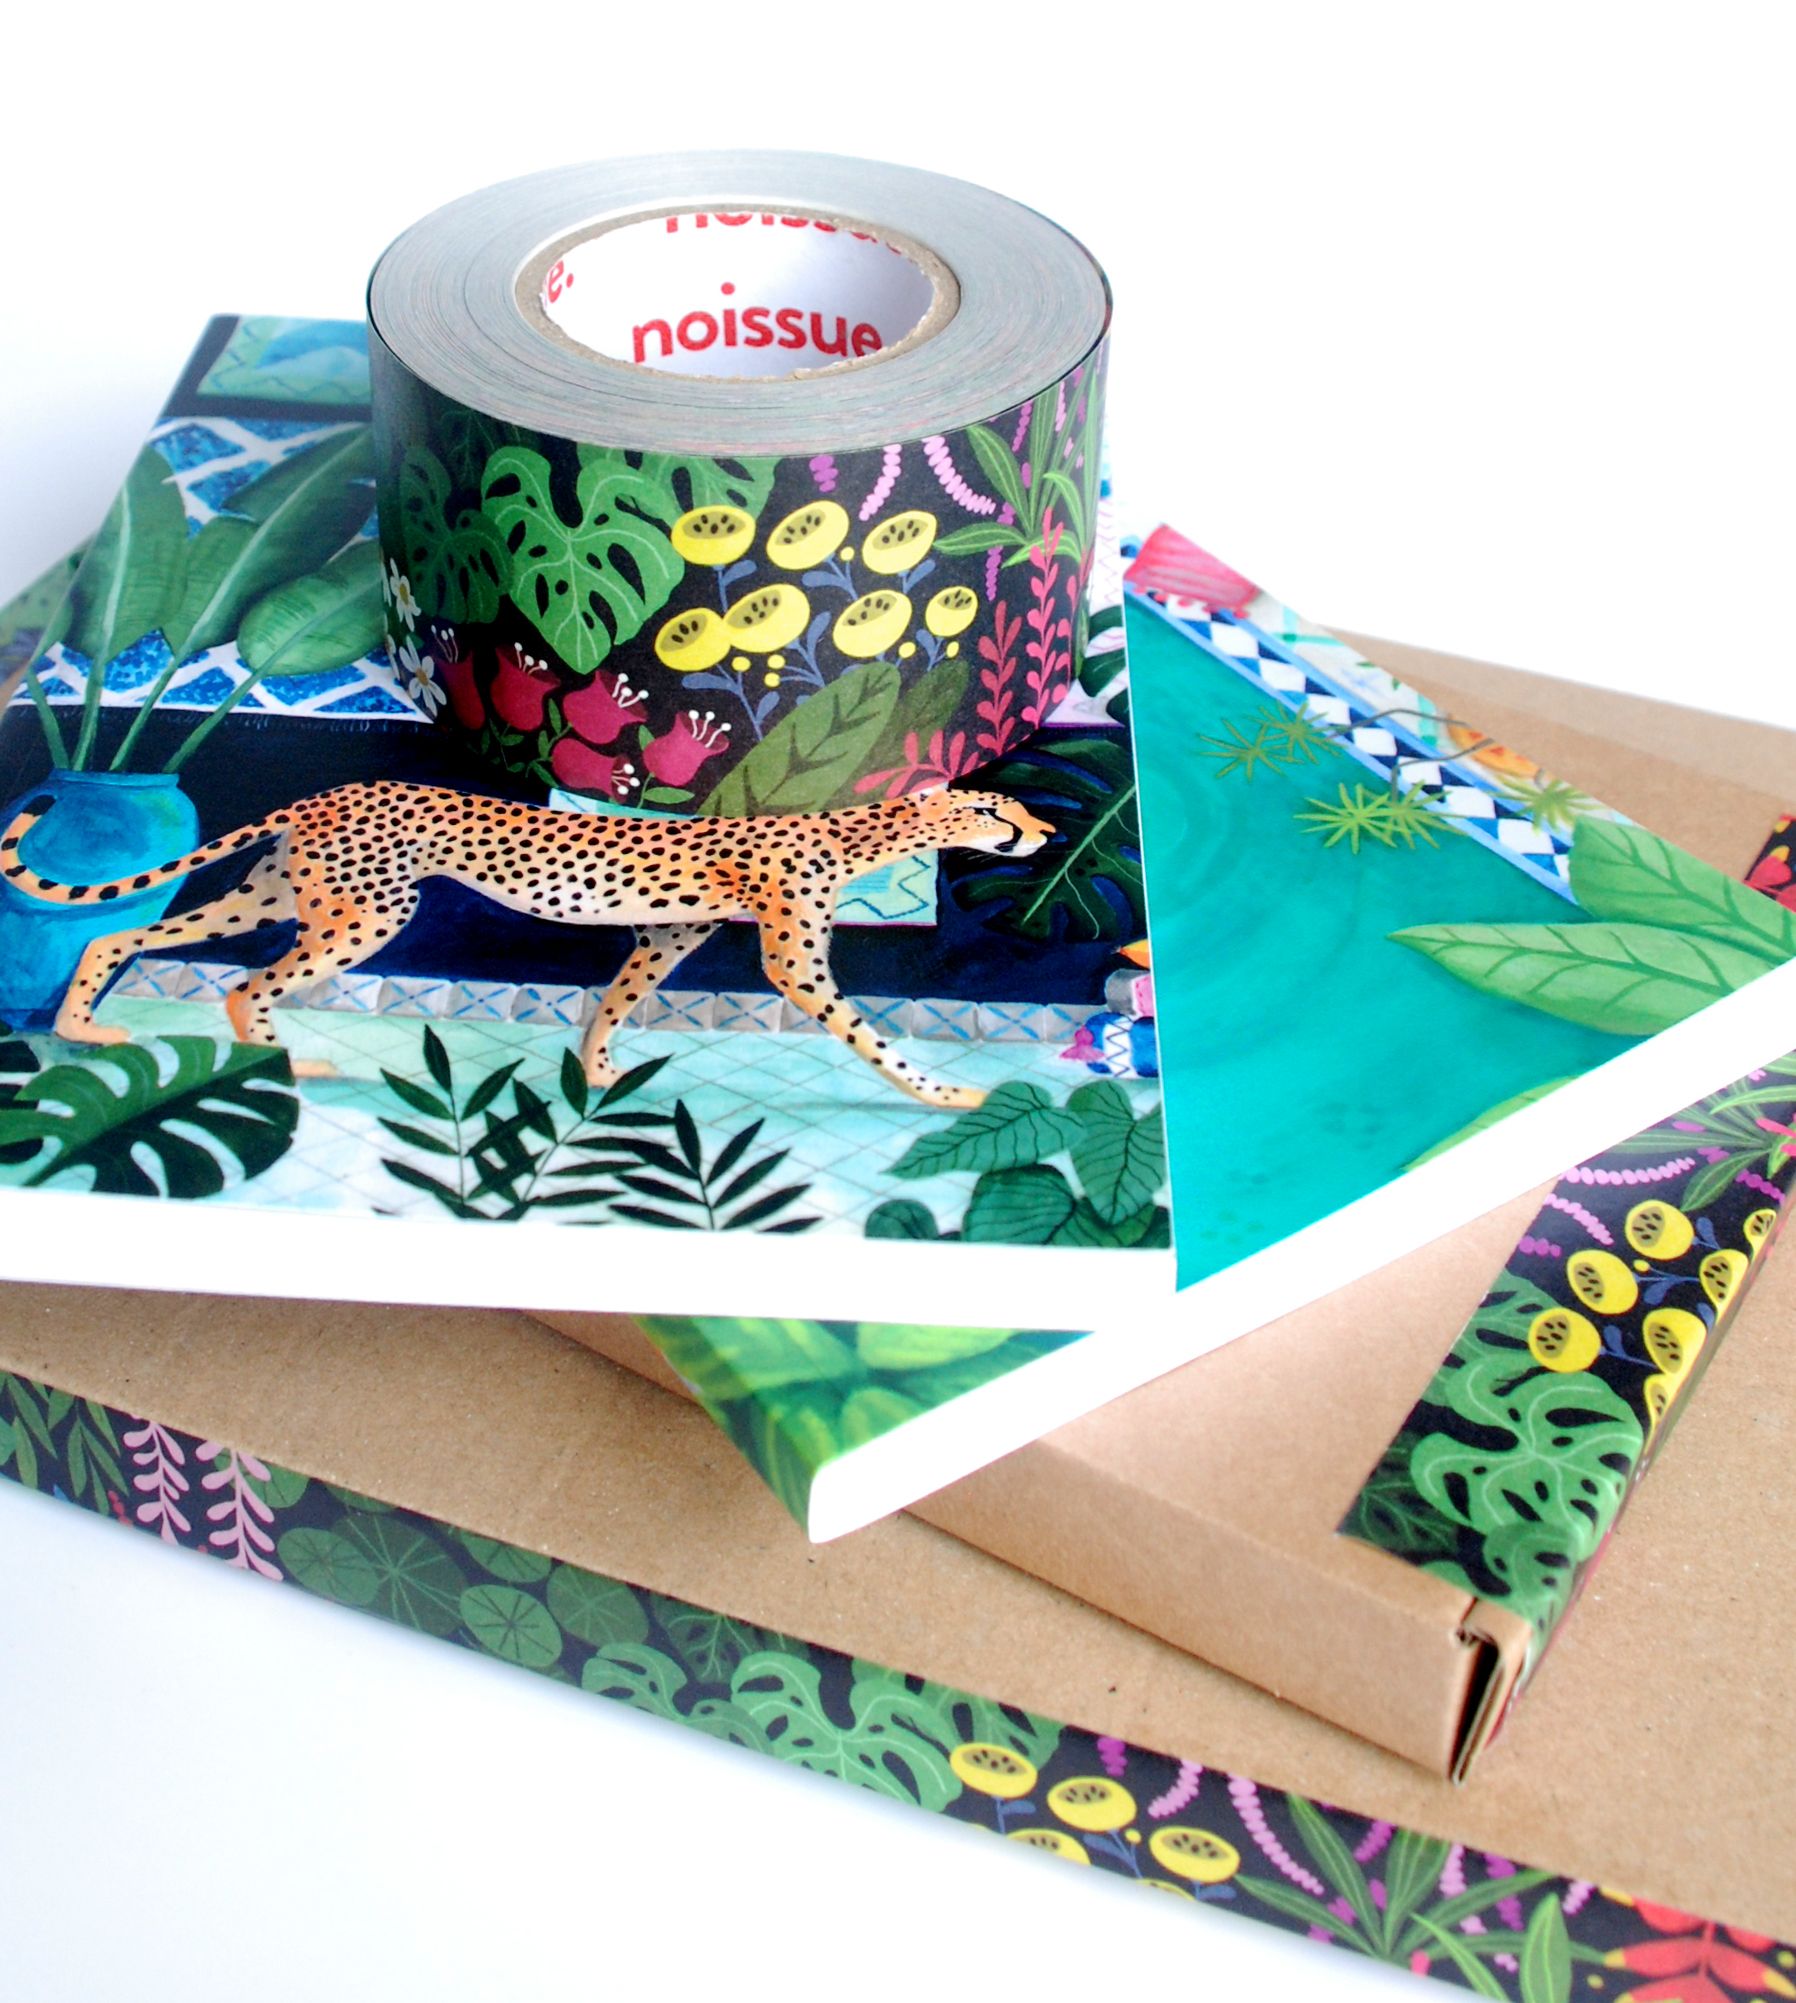 Bex Parkin Illustration: Stationery that Puts the “Art” in “Earth”